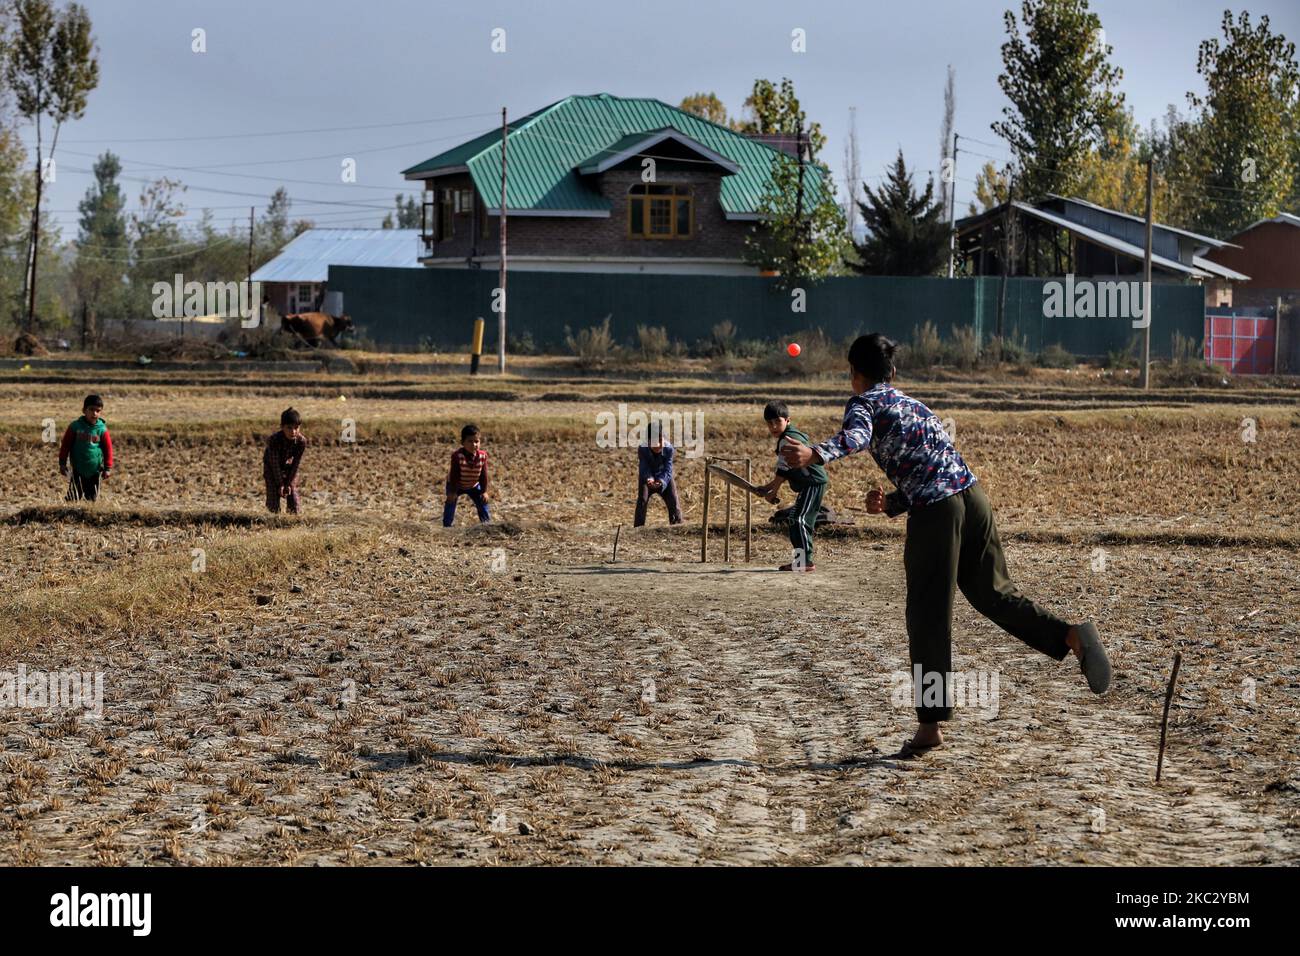 Kashmiri kids playing Cricket in agriculture Land (Paddy Fields) in the outskirts of Sopore Town in District Baramulla, jammu and Kashmir, India on 30 October 2020. As the anger grows in Jammu and Kashmir over the new land laws, which allow any Indian citizen to buy land in the Union territory, the separatist Hurriyat Conference on Wednesday broke its silence and called for a one-day shutdown on October 31 to protest the â€œanti-people movesâ€ by New Delhi. (Photo by Nasir Kachroo/NurPhoto) Stock Photo